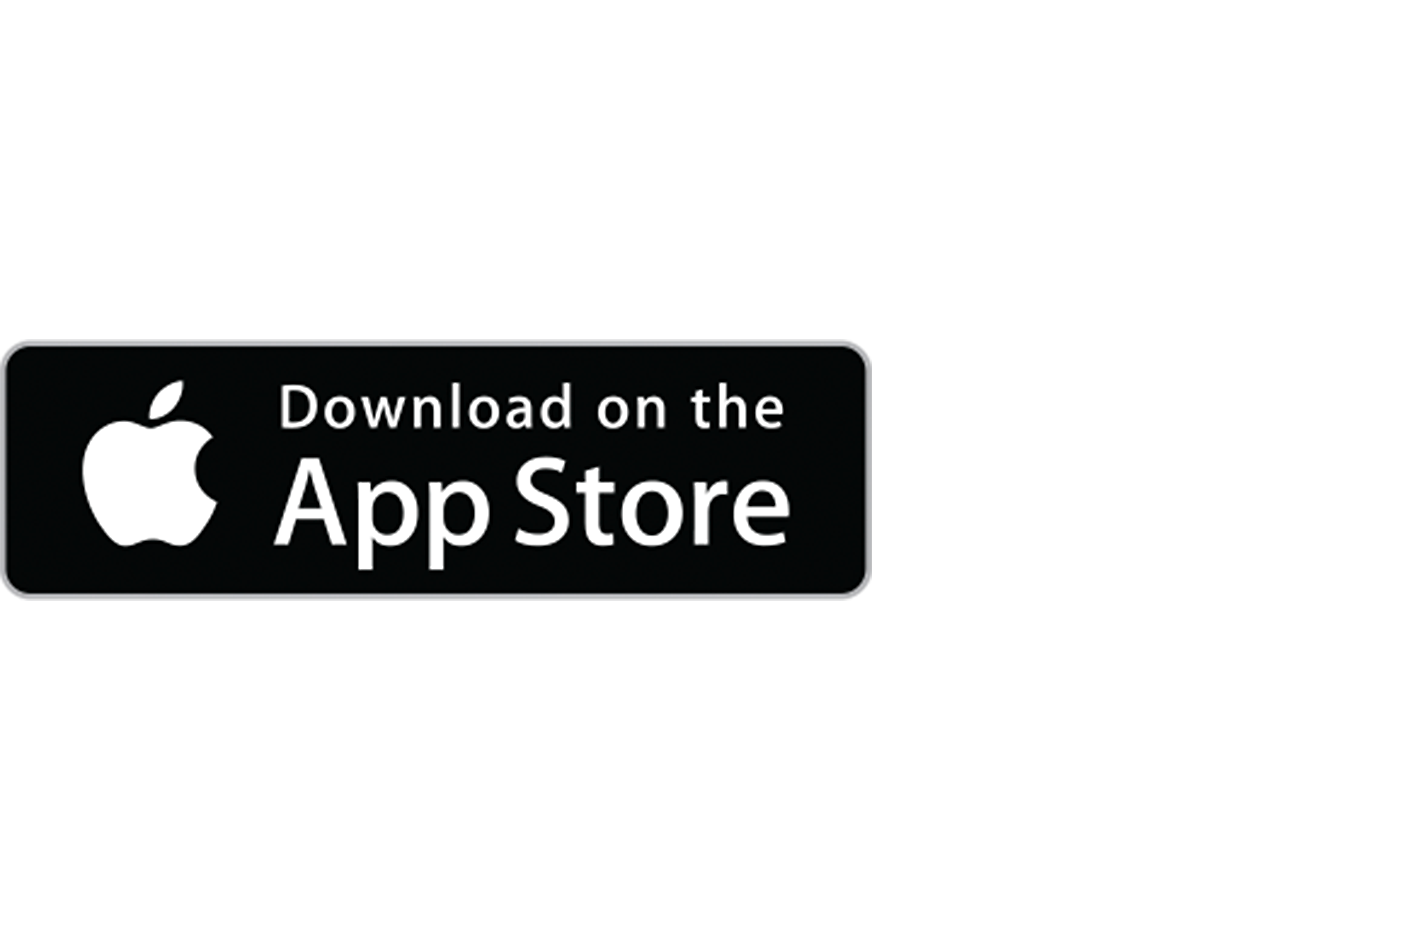 Image of the Apple App Store logo with the words "Download on the Apple App Store" above